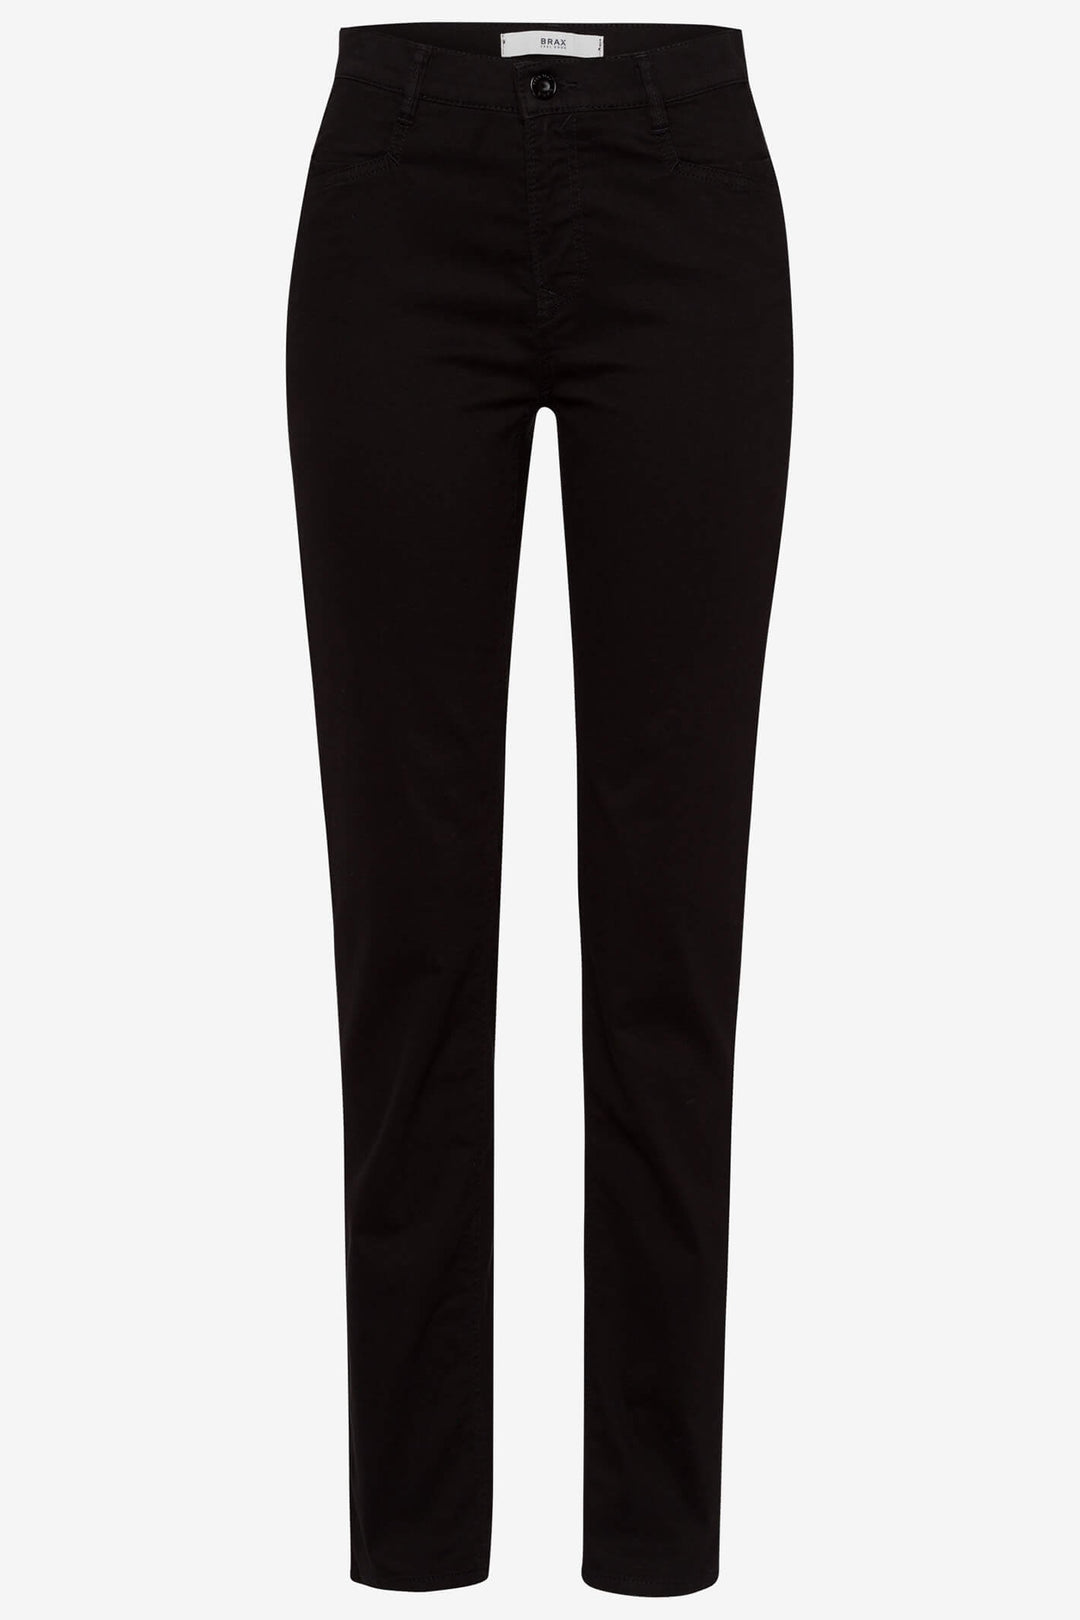 Brax Mary 79-1754 02 Black Thermo Jeans - Shirley Allum Boutique